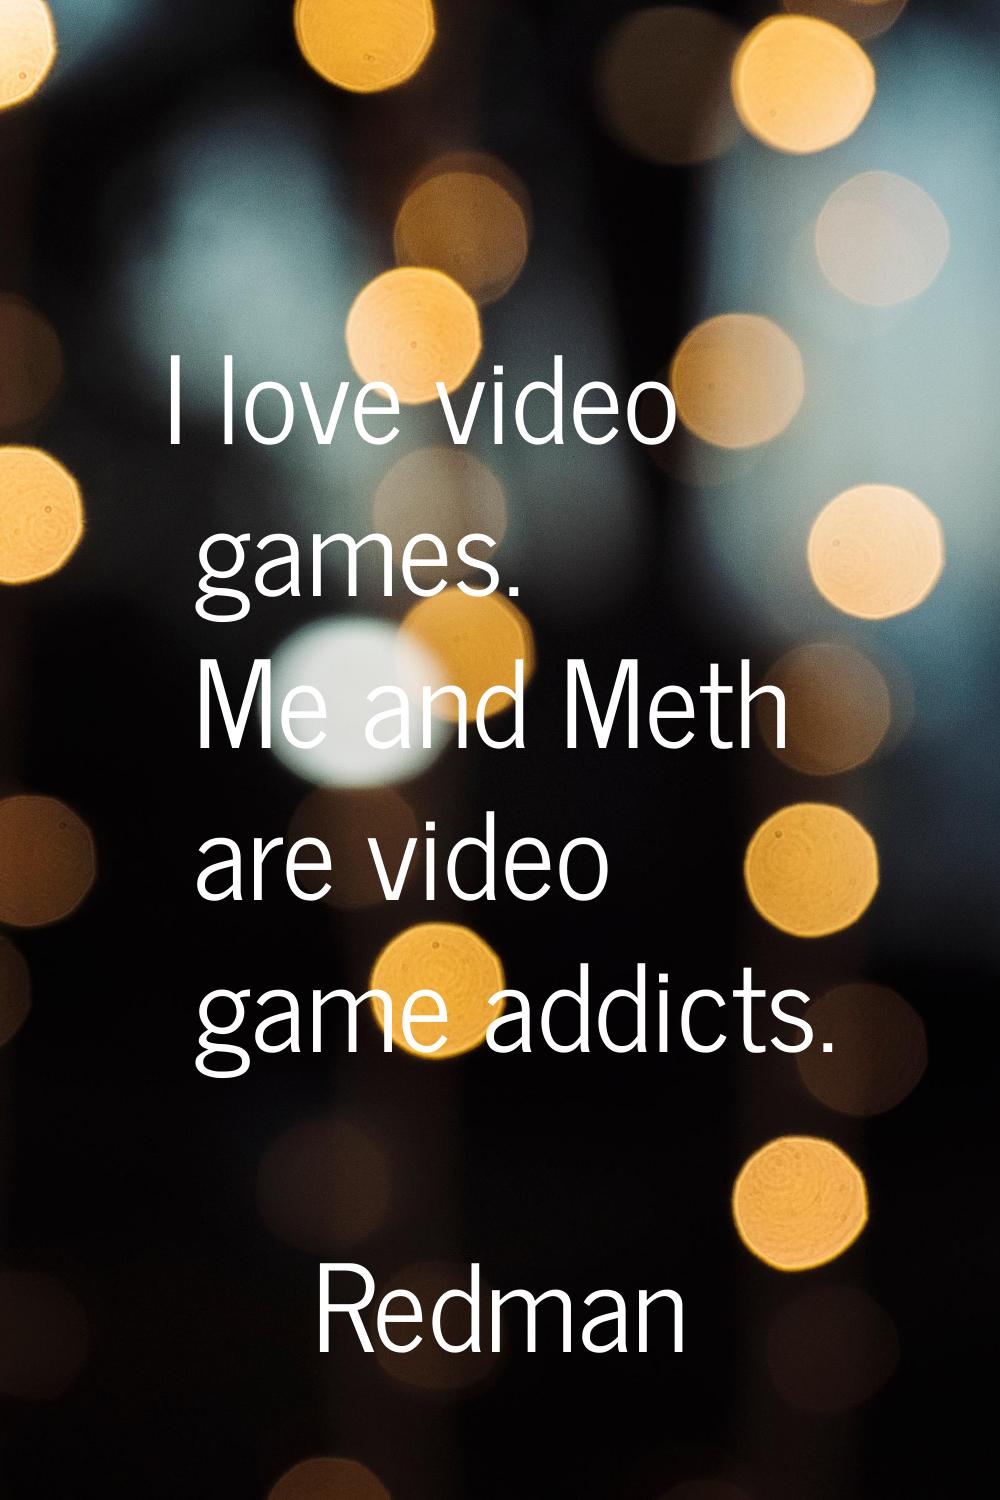 I love video games. Me and Meth are video game addicts.